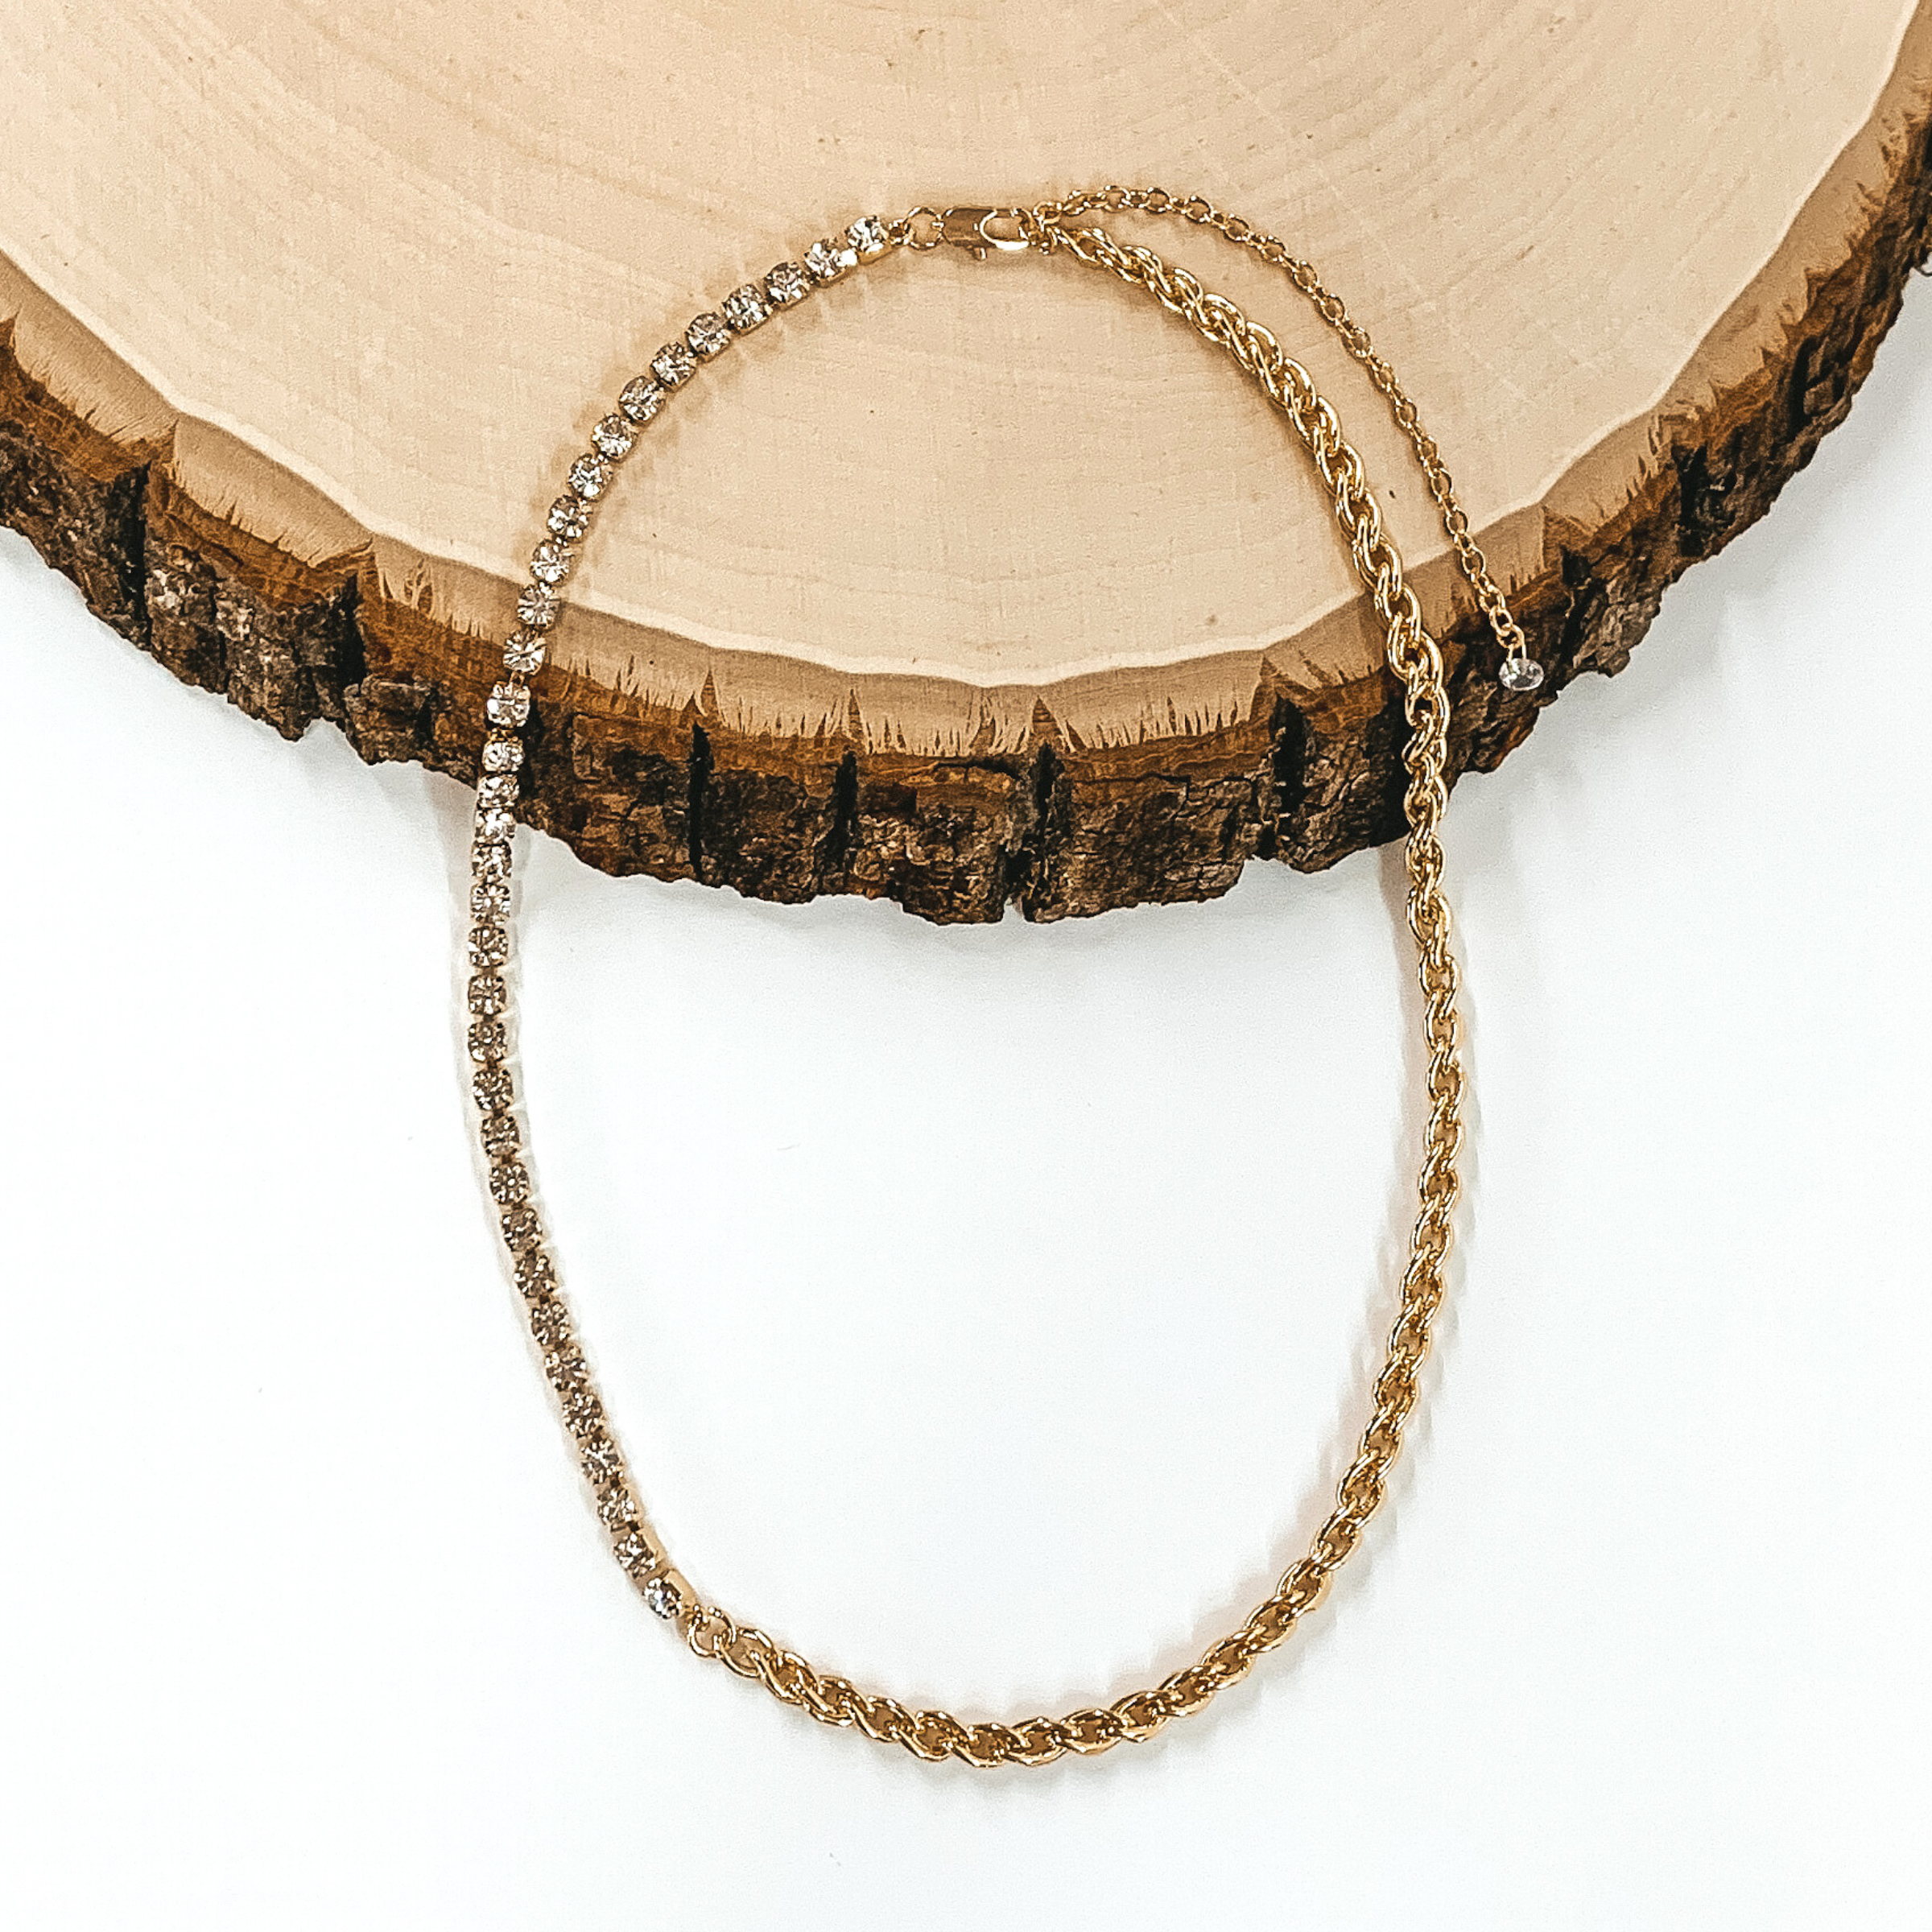 A single gold chained necklace. This necklace includes two different types of chains on the same strand. I rope strand that goes into a clear crystalized chain. This necklace is laying on a piece of wood and is pictured on a white background. 